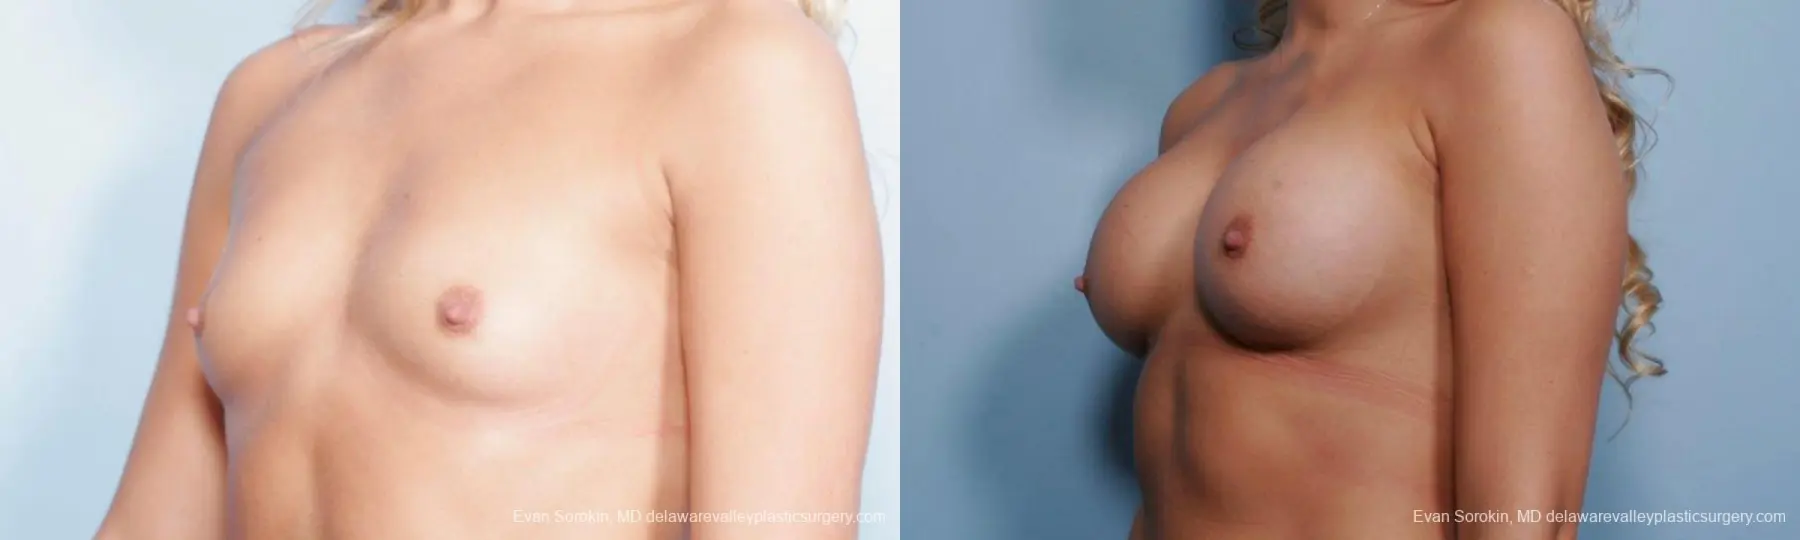 Philadelphia Breast Augmentation 9356 - Before and After 4